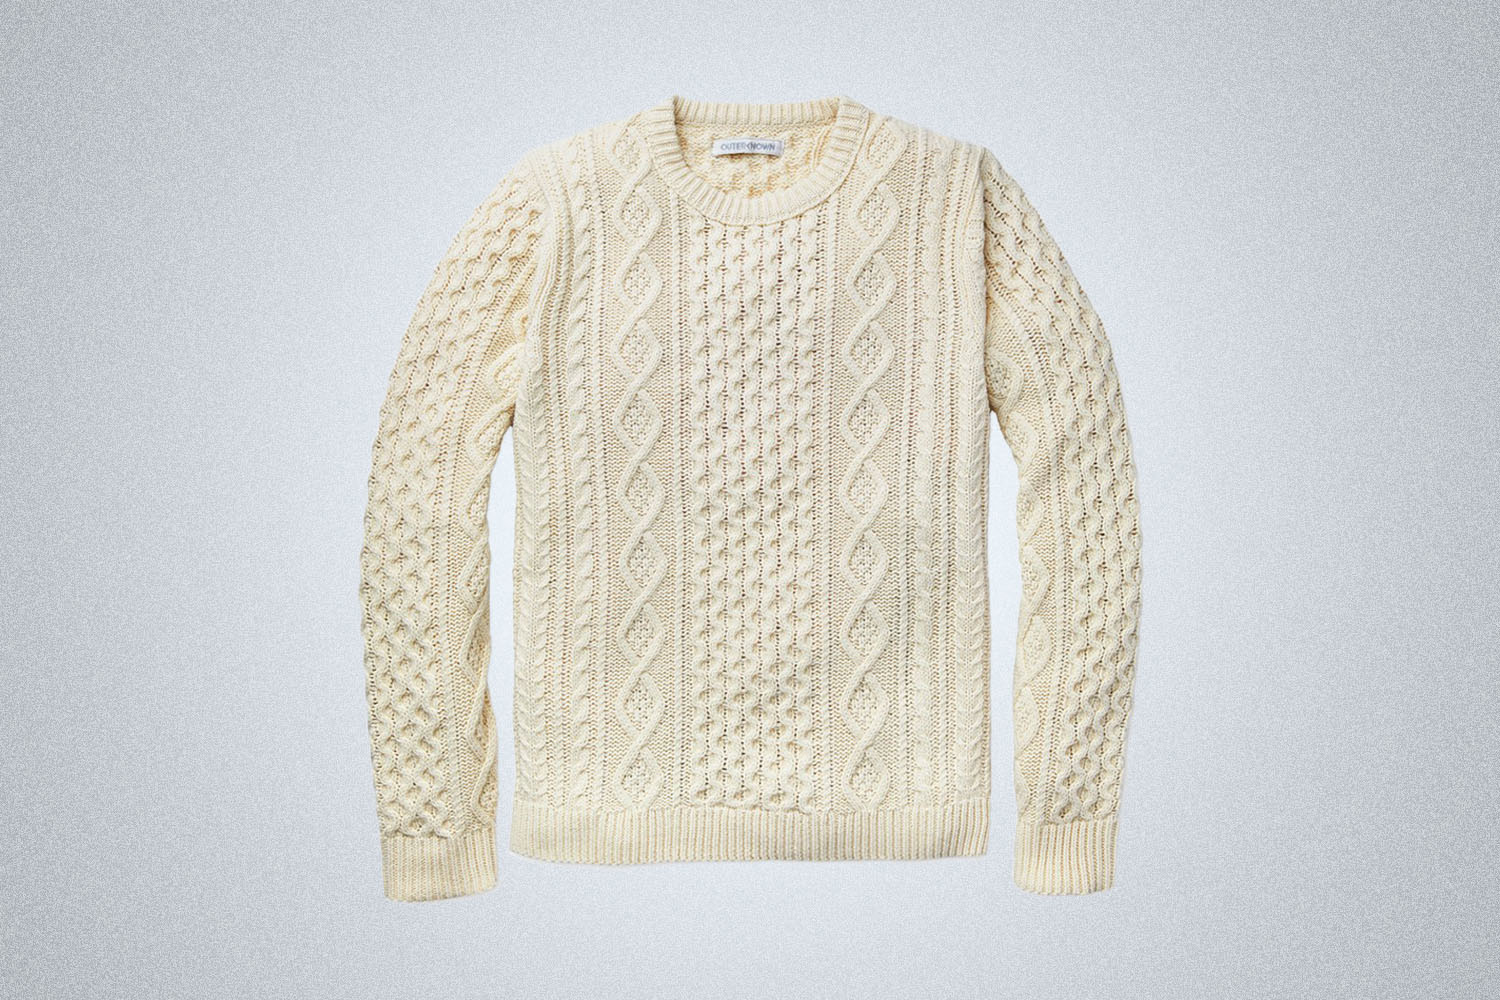 a cable knit fishermans sweater